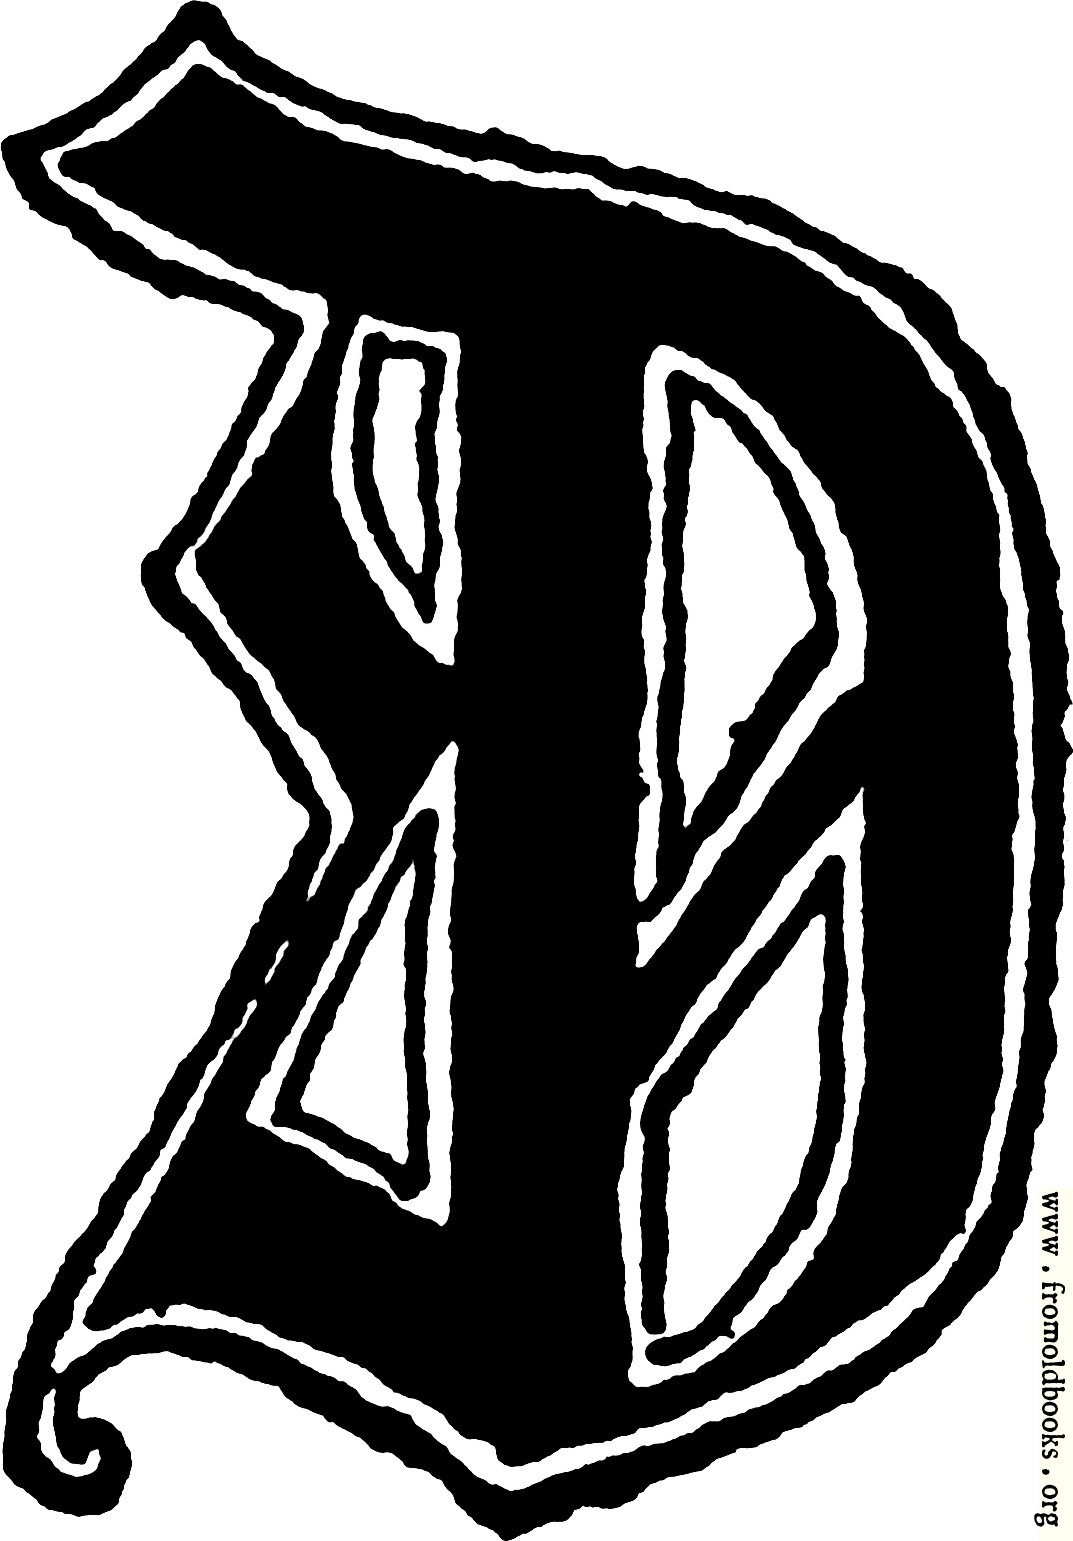 [Picture: Calligraphic letter “D” in 15th century gothic style]